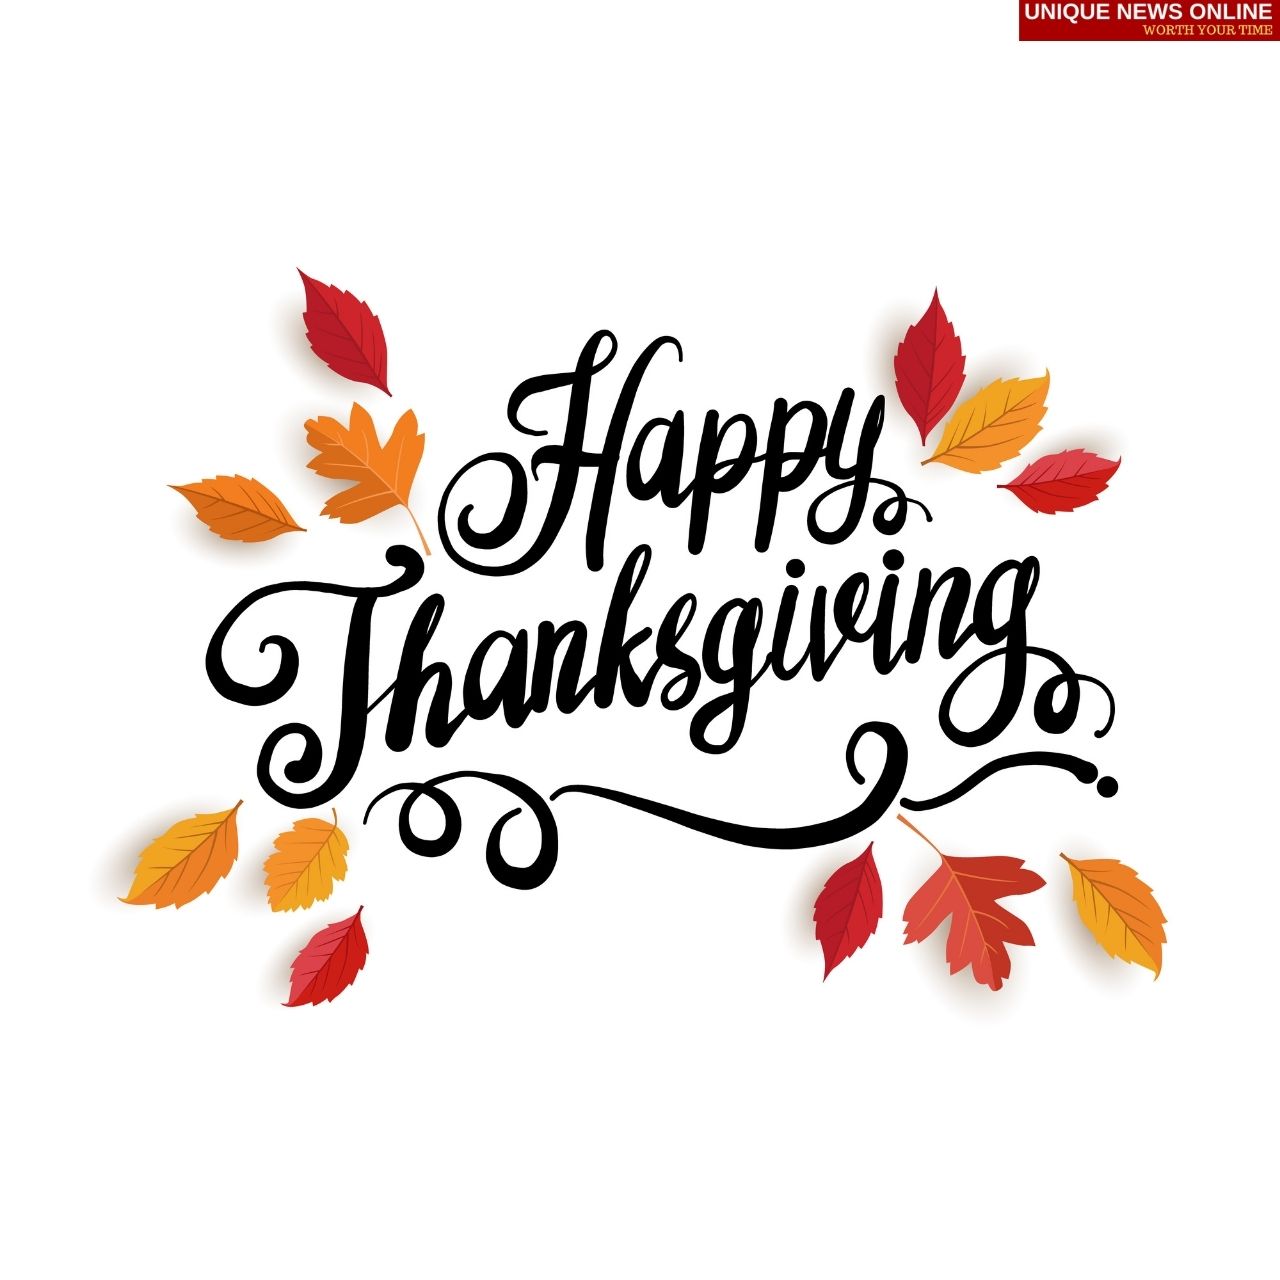 Thanksgiving 2021 Wishes, Quotes, Sayings, Messages, and HD Images for Teachers